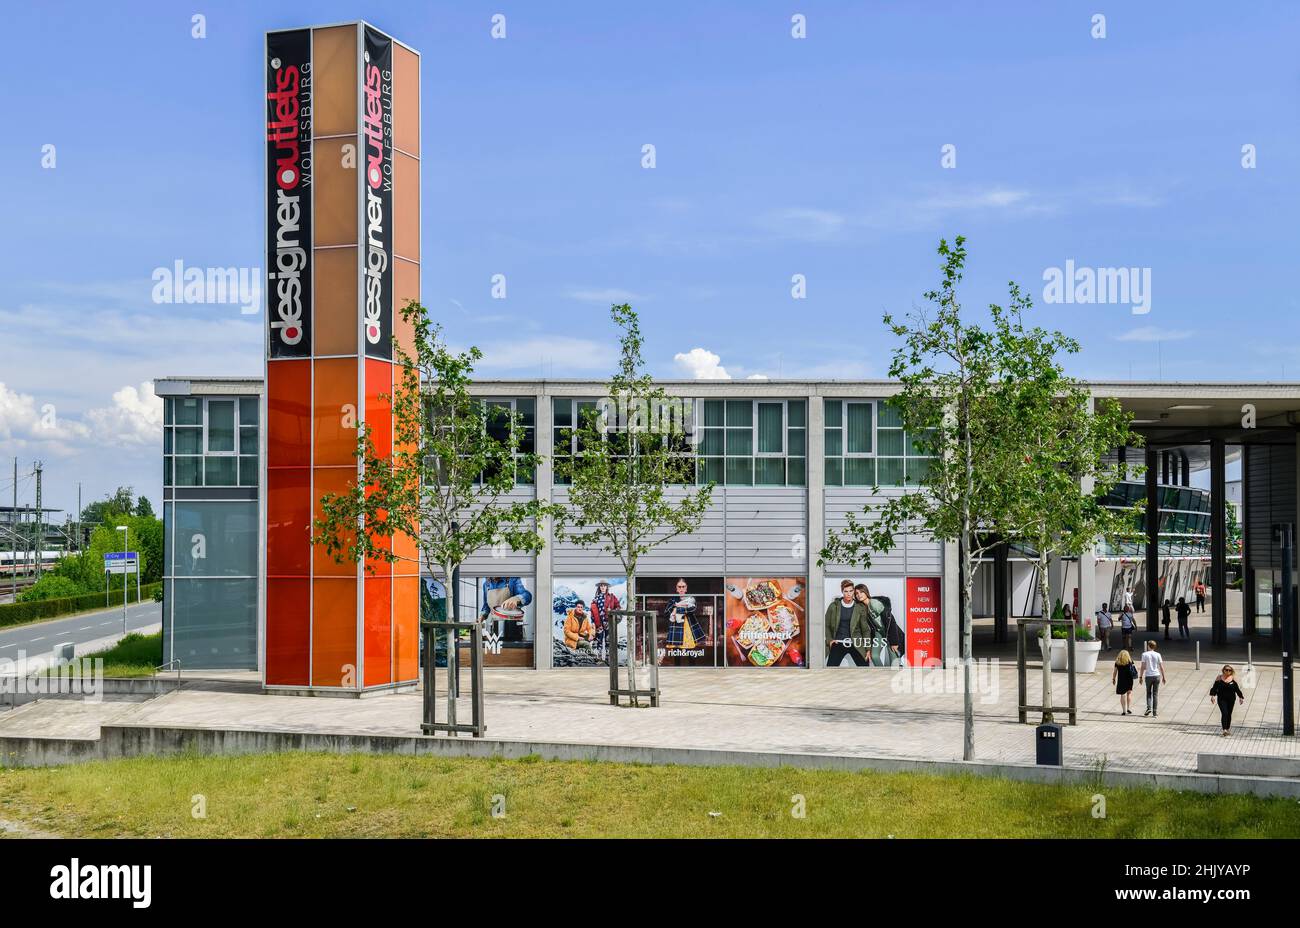 Designer Outlets High Resolution Stock Photography and Images - Alamy